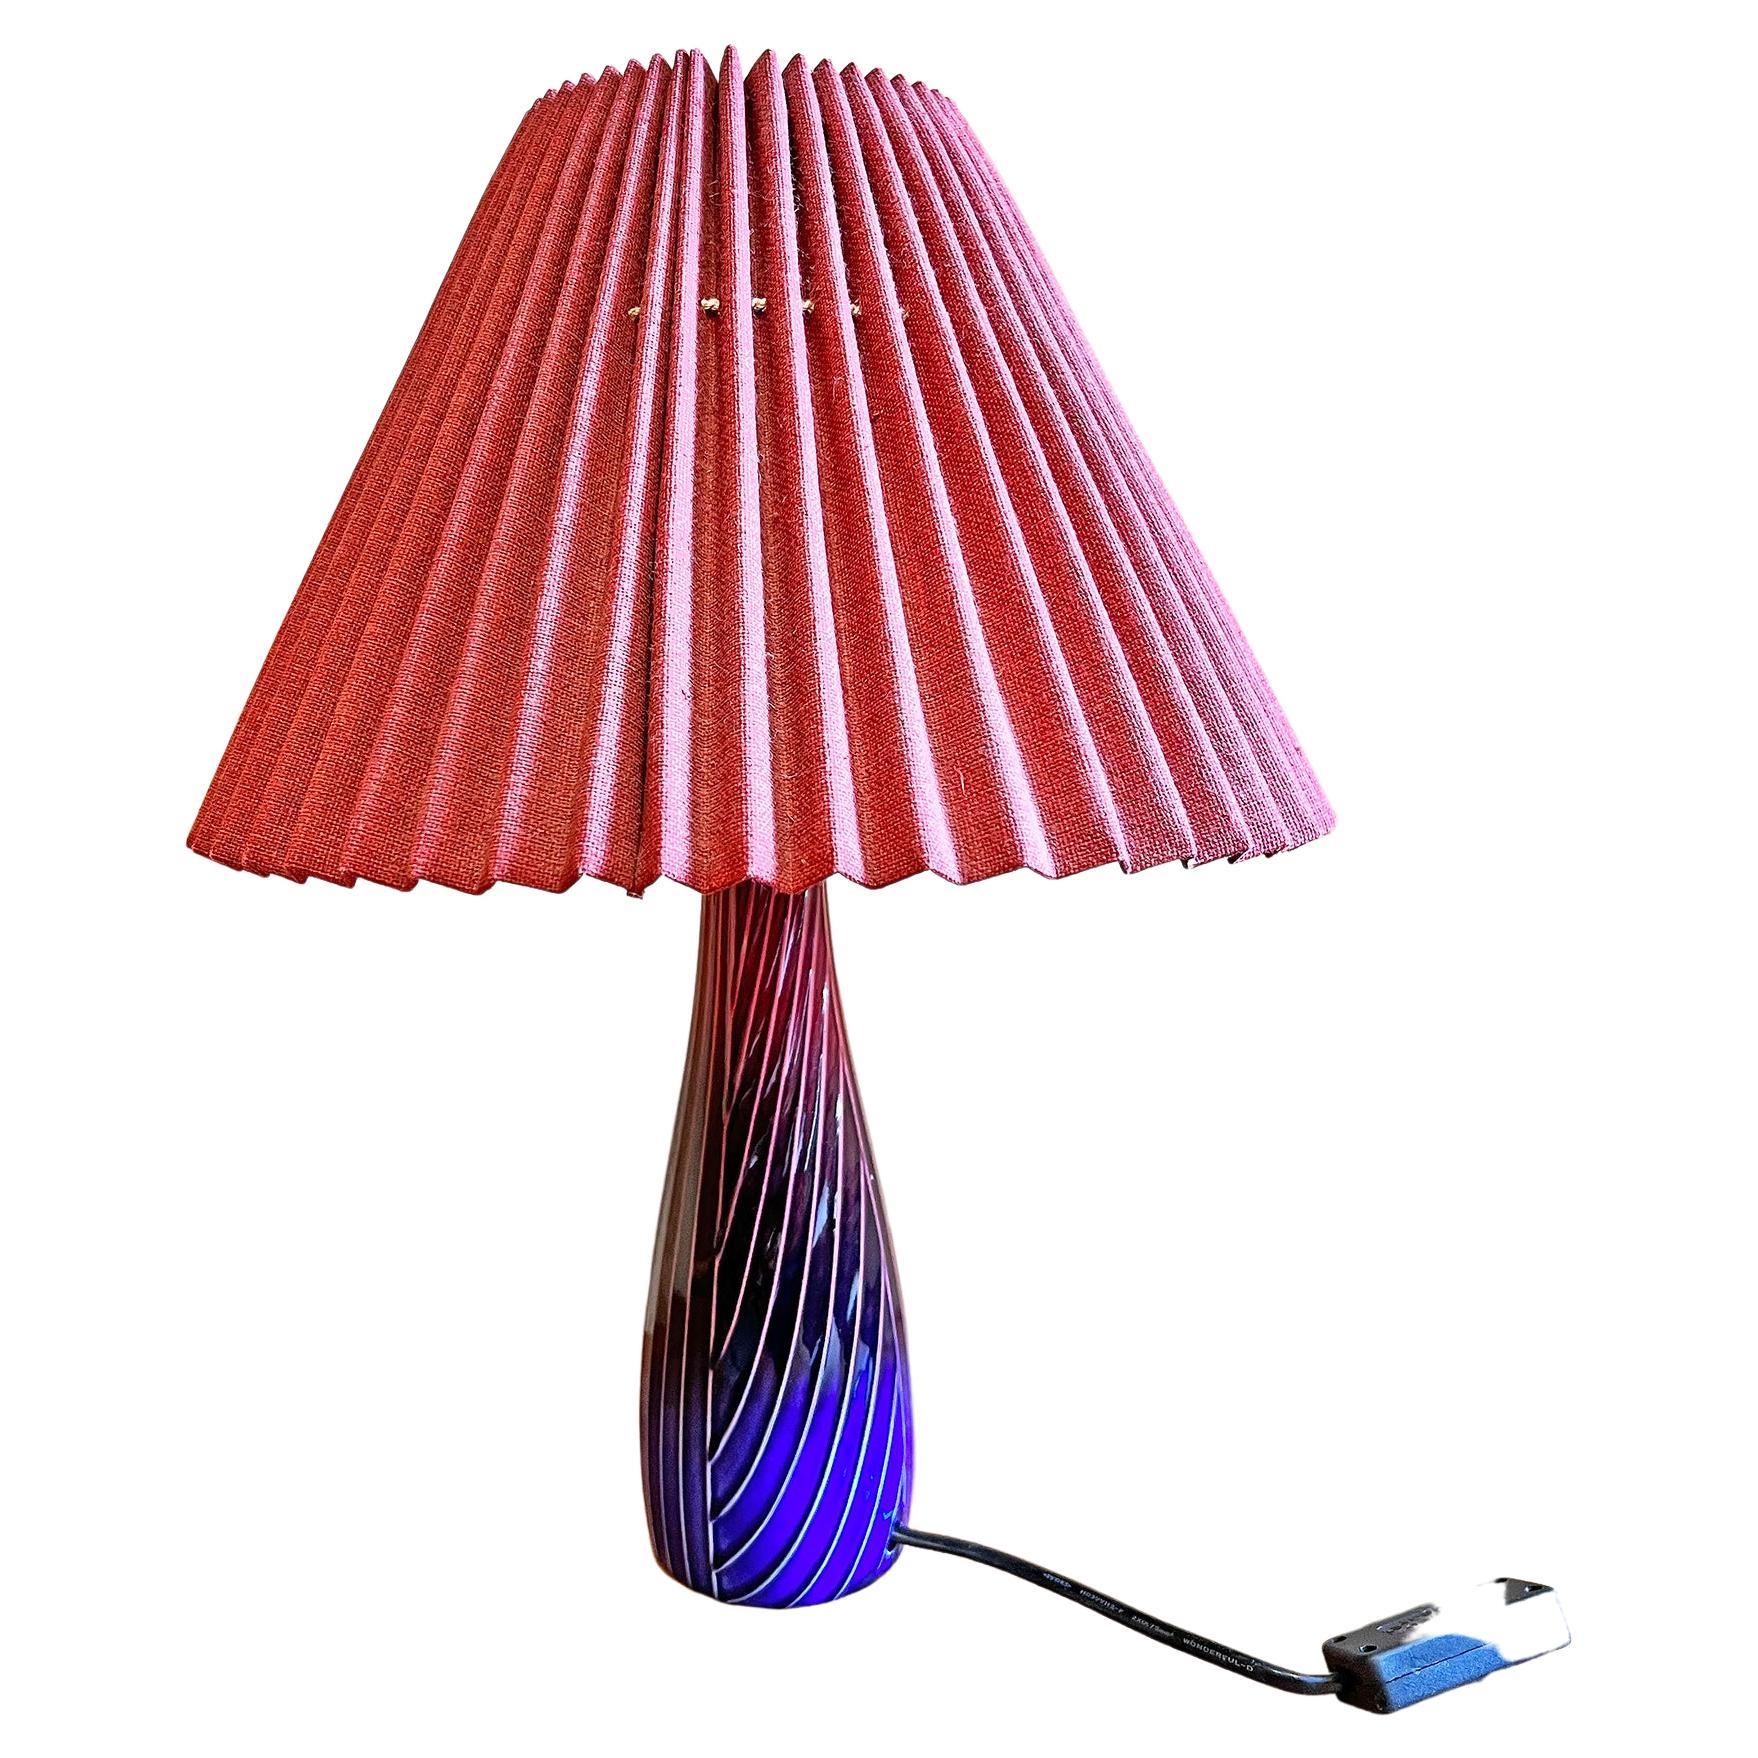 Table Lamp "Sparaxis" in Flintware, Rörstrand, circa 1950s-1960s For Sale